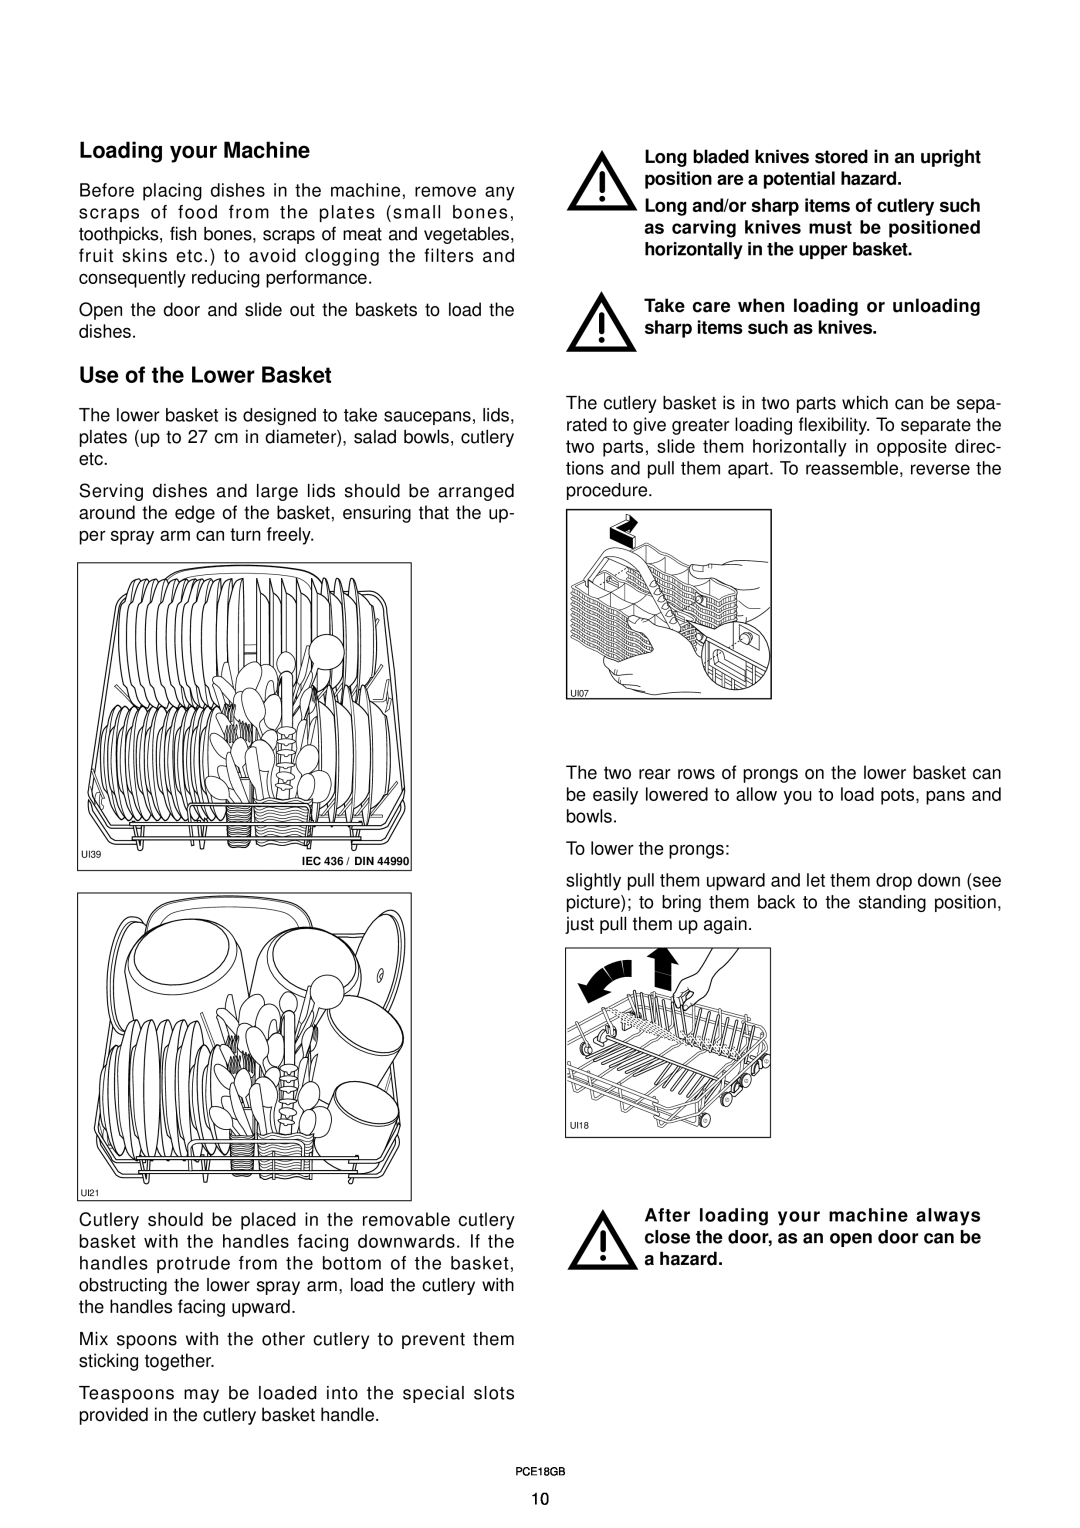 Zanussi DW 911 manual Loading your Machine, Use of the Lower Basket 